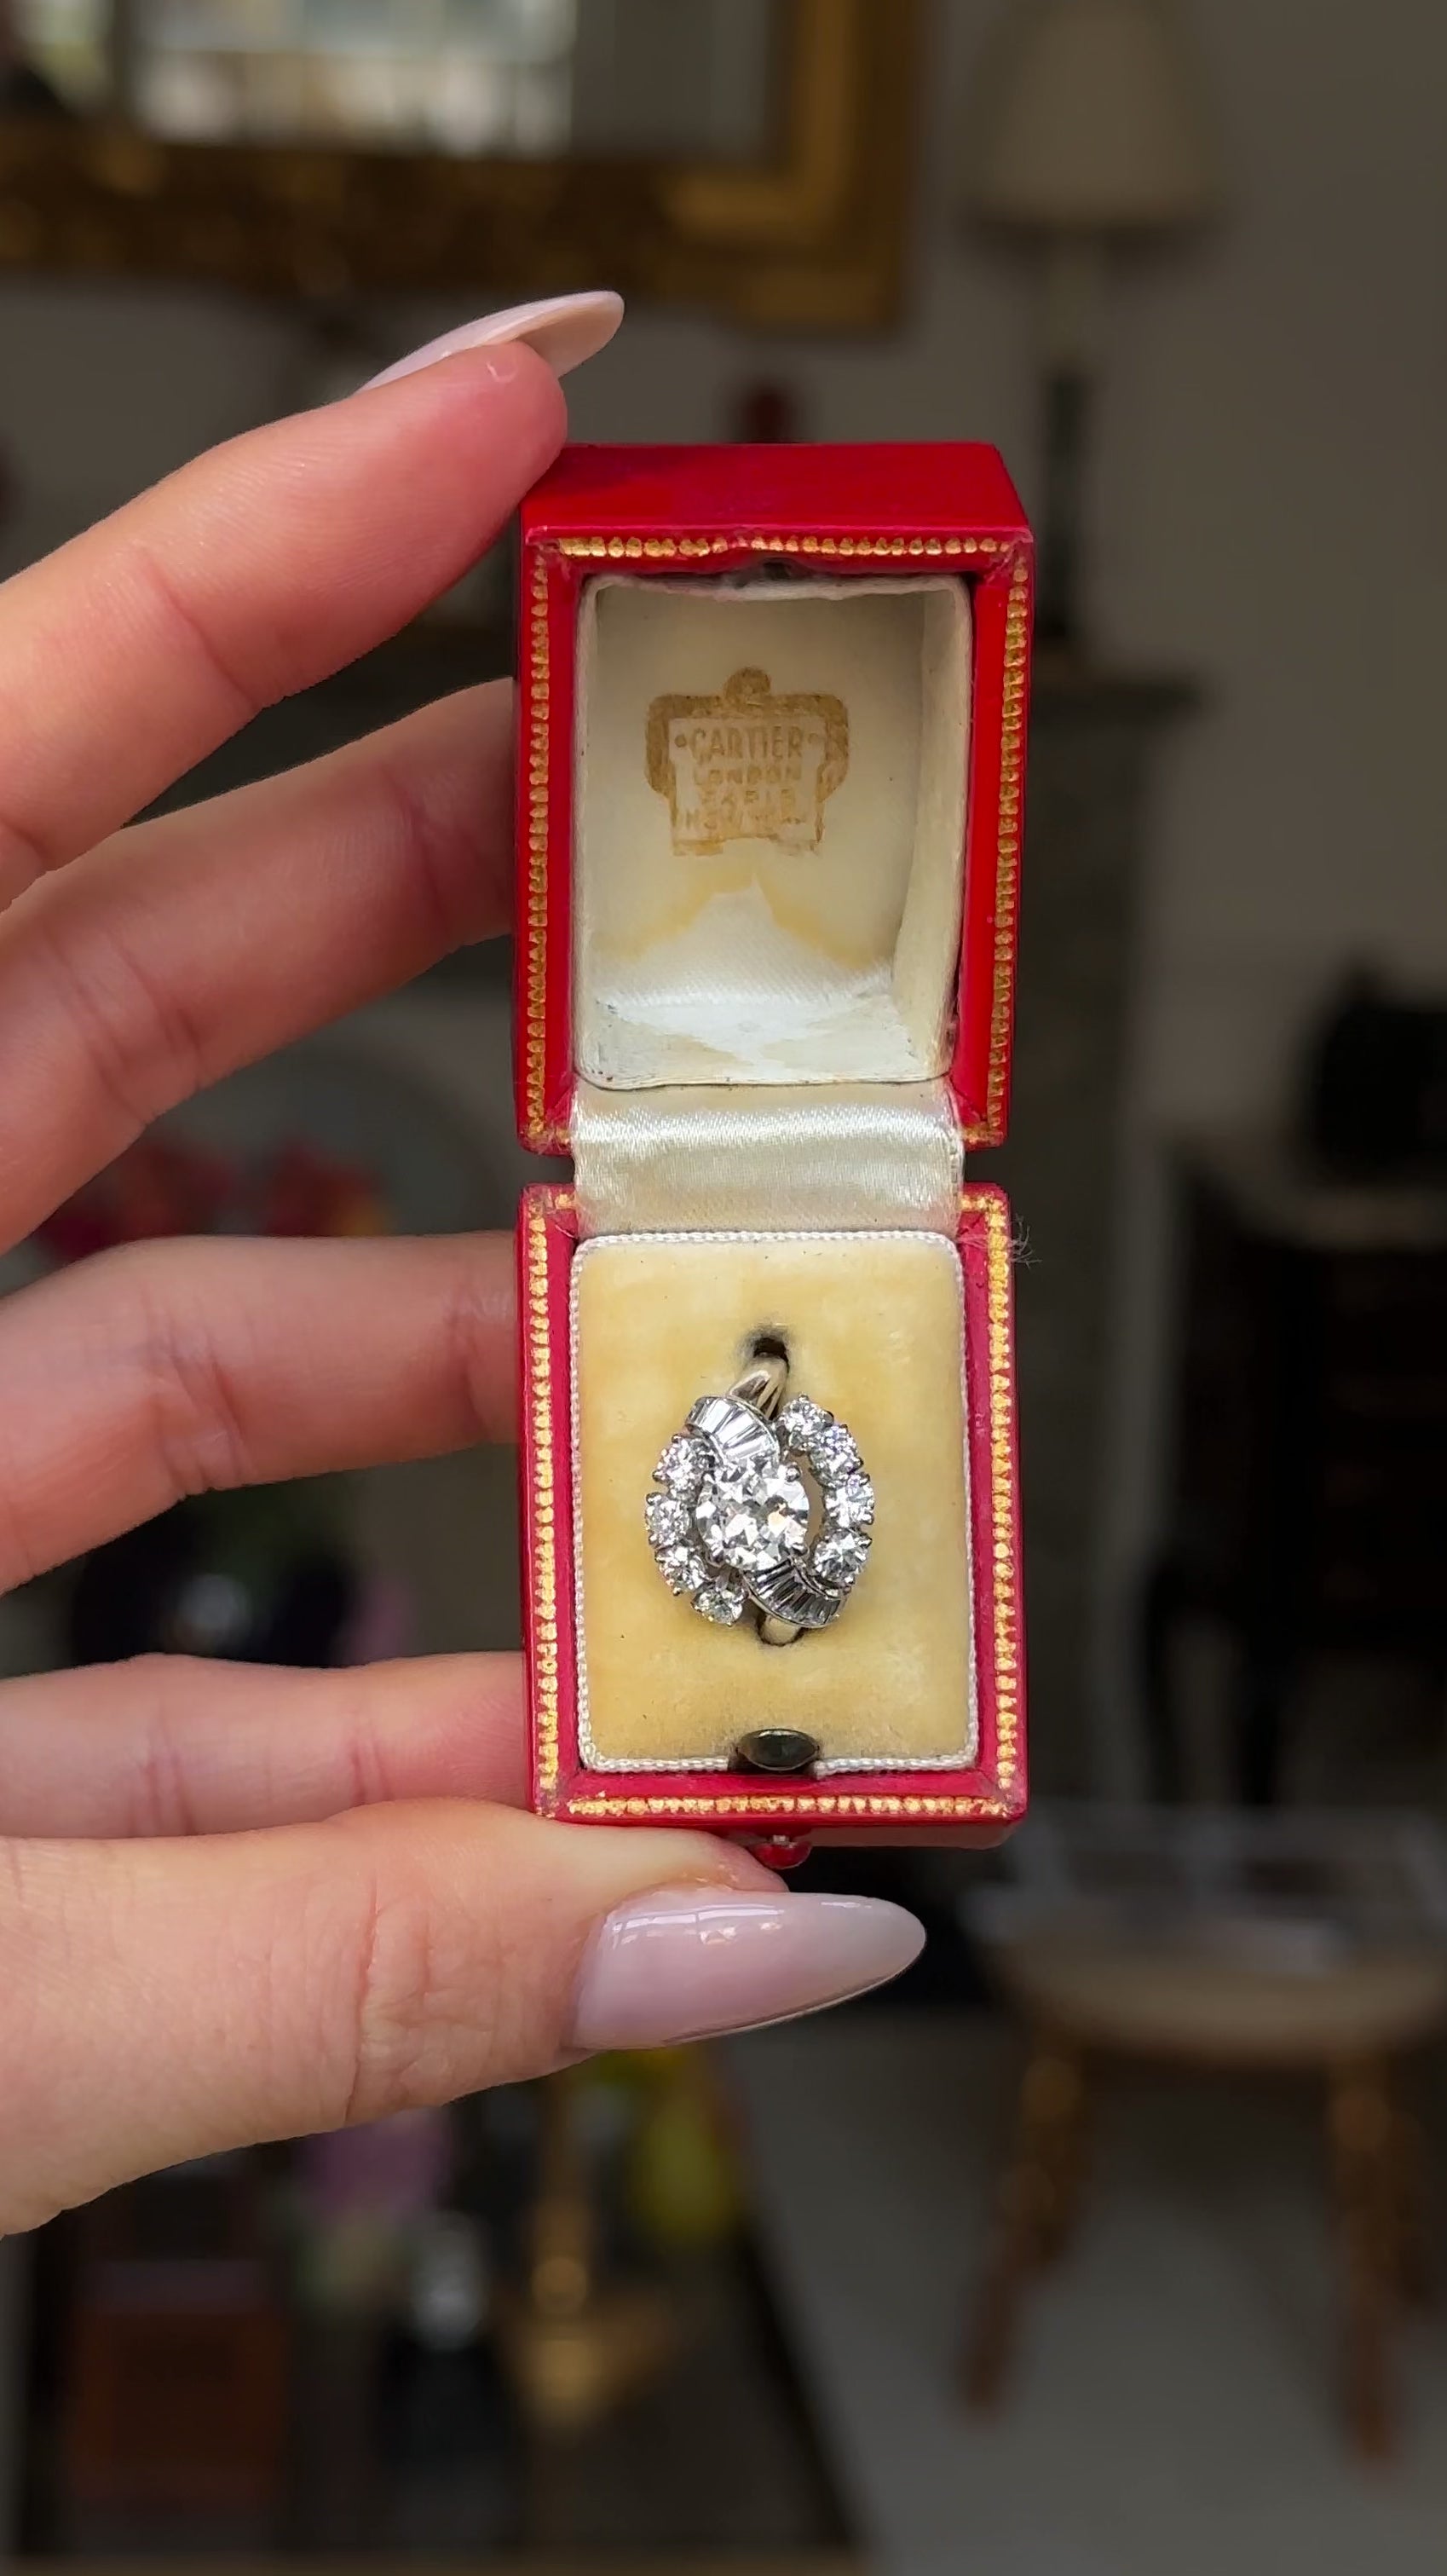 Cartier diamond engagement ring in box.  